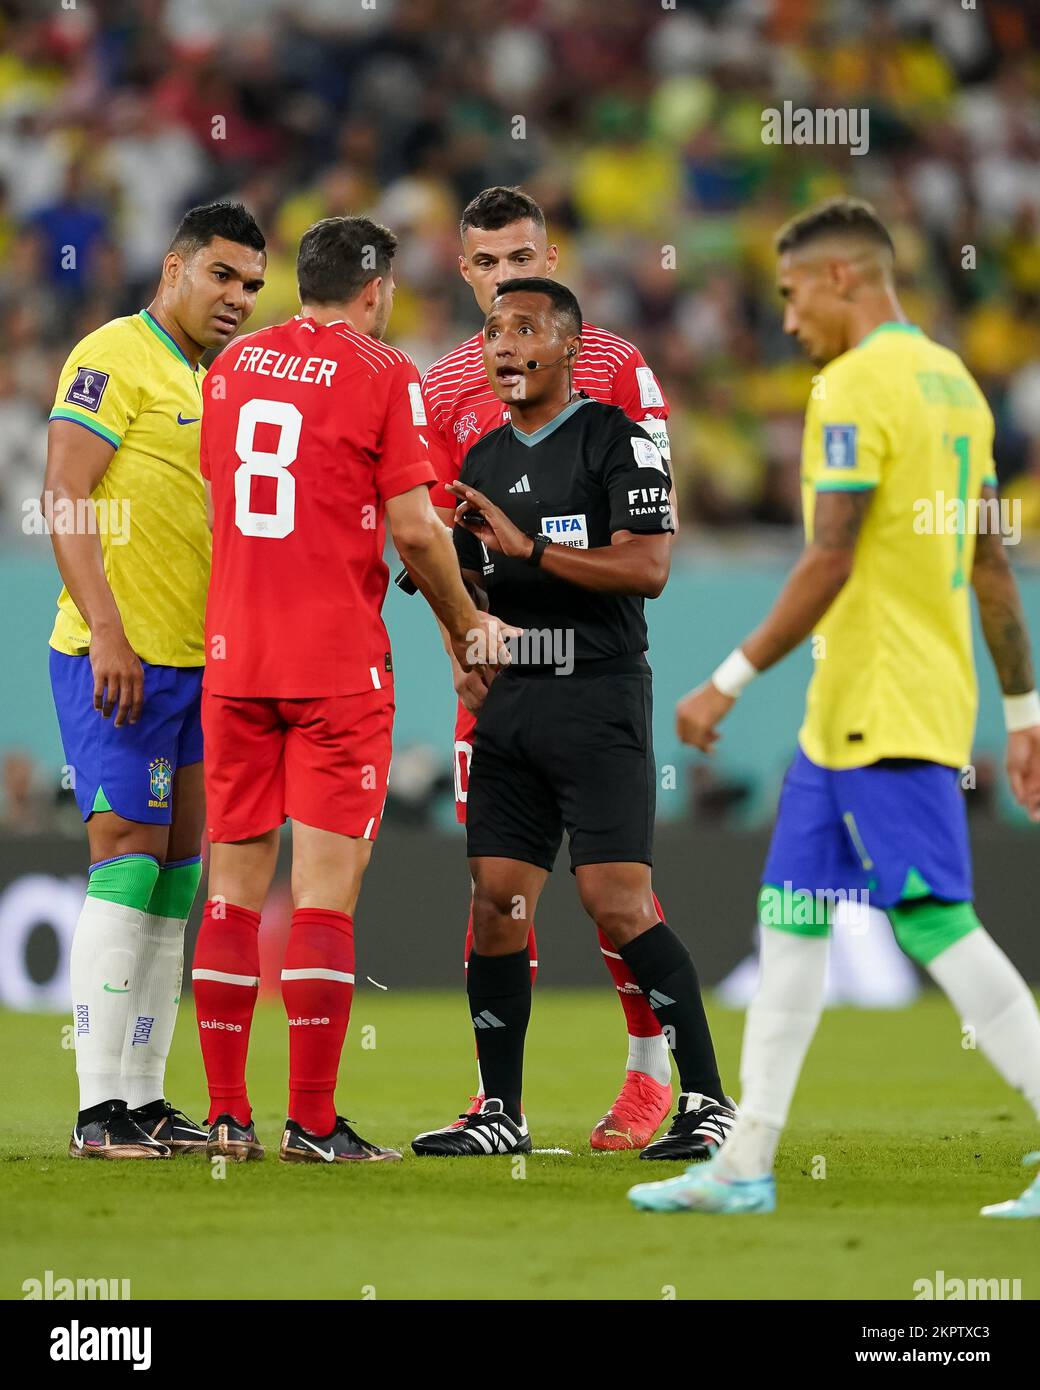 DOHA, QATAR - NOVEMBER 28: Player of Switzerland Remo Freuler talks to the referee during the FIFA World Cup Qatar 2022 group G match between Brazil and Switzerland at Stadium 974 on November 28, 2022 in Doha, Qatar. (Photo by Florencia Tan Jun/PxImages) Stock Photo